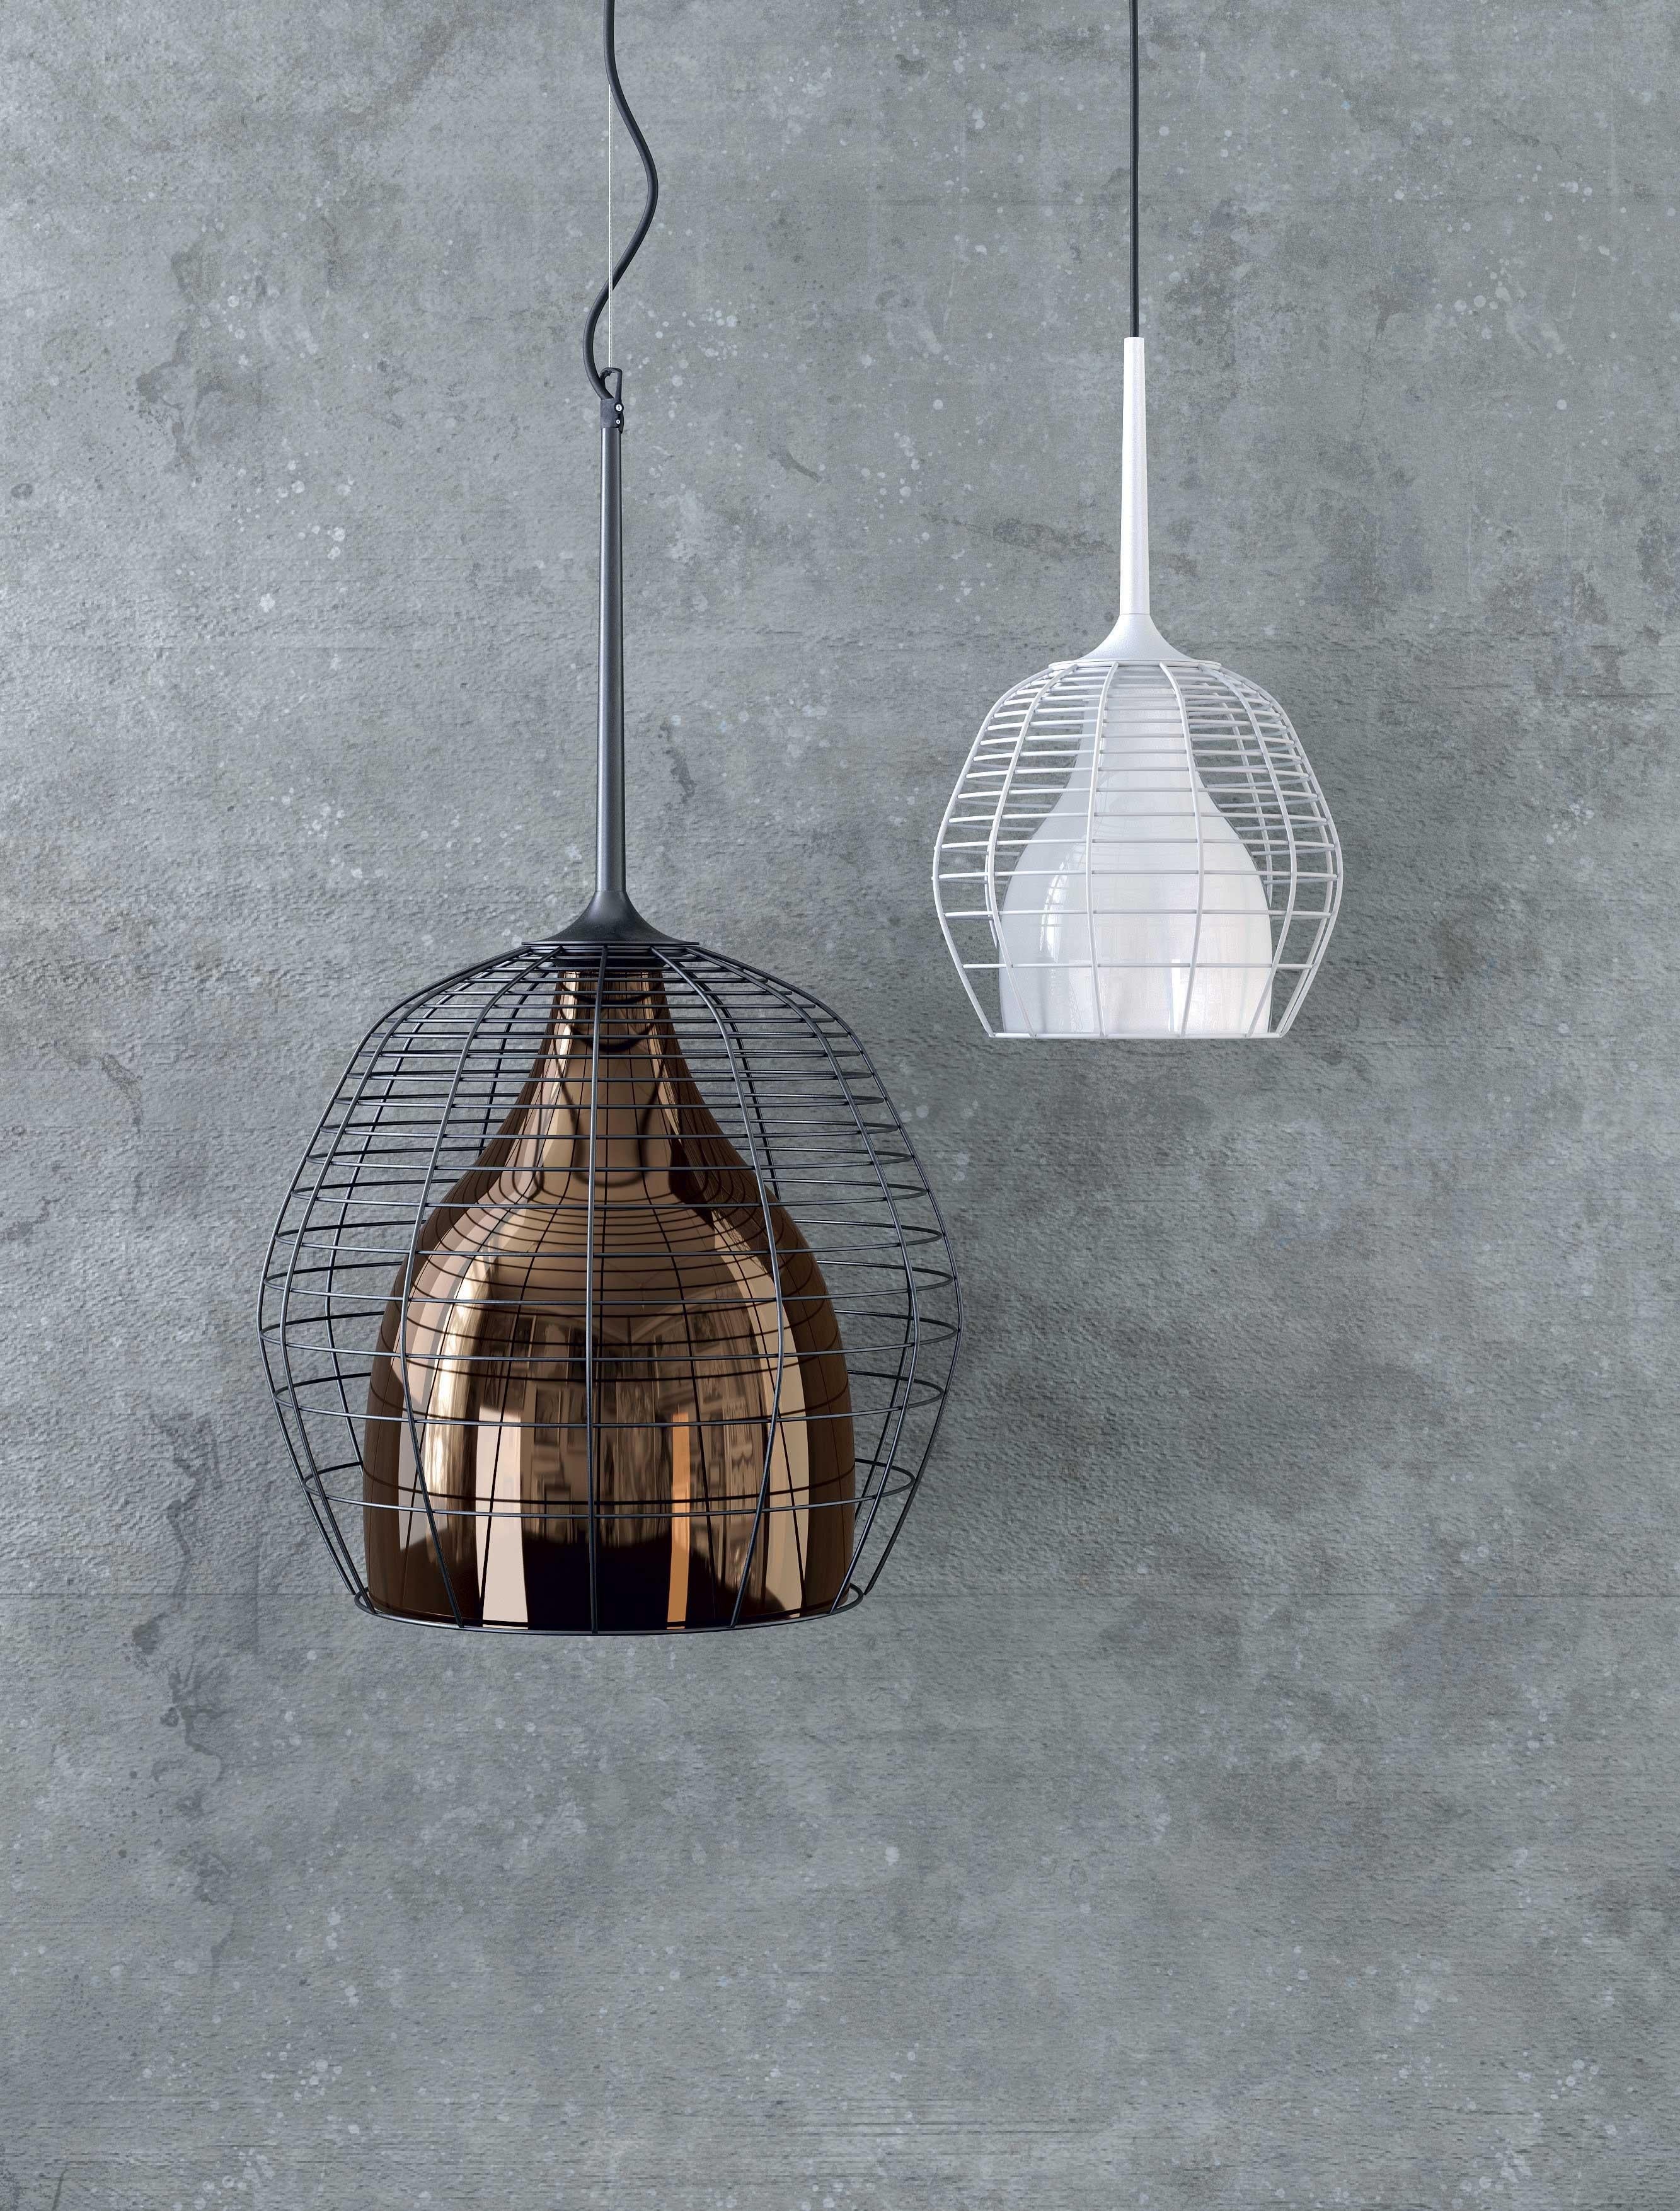 The Small version, 27.5 cm in diameter, lends itself to multiple compositions with a metropolitan taste. Its origin is “underground”: Cage is inspired by the lamps used by miners and workers, protected by a metal cage which here becomes a decorative